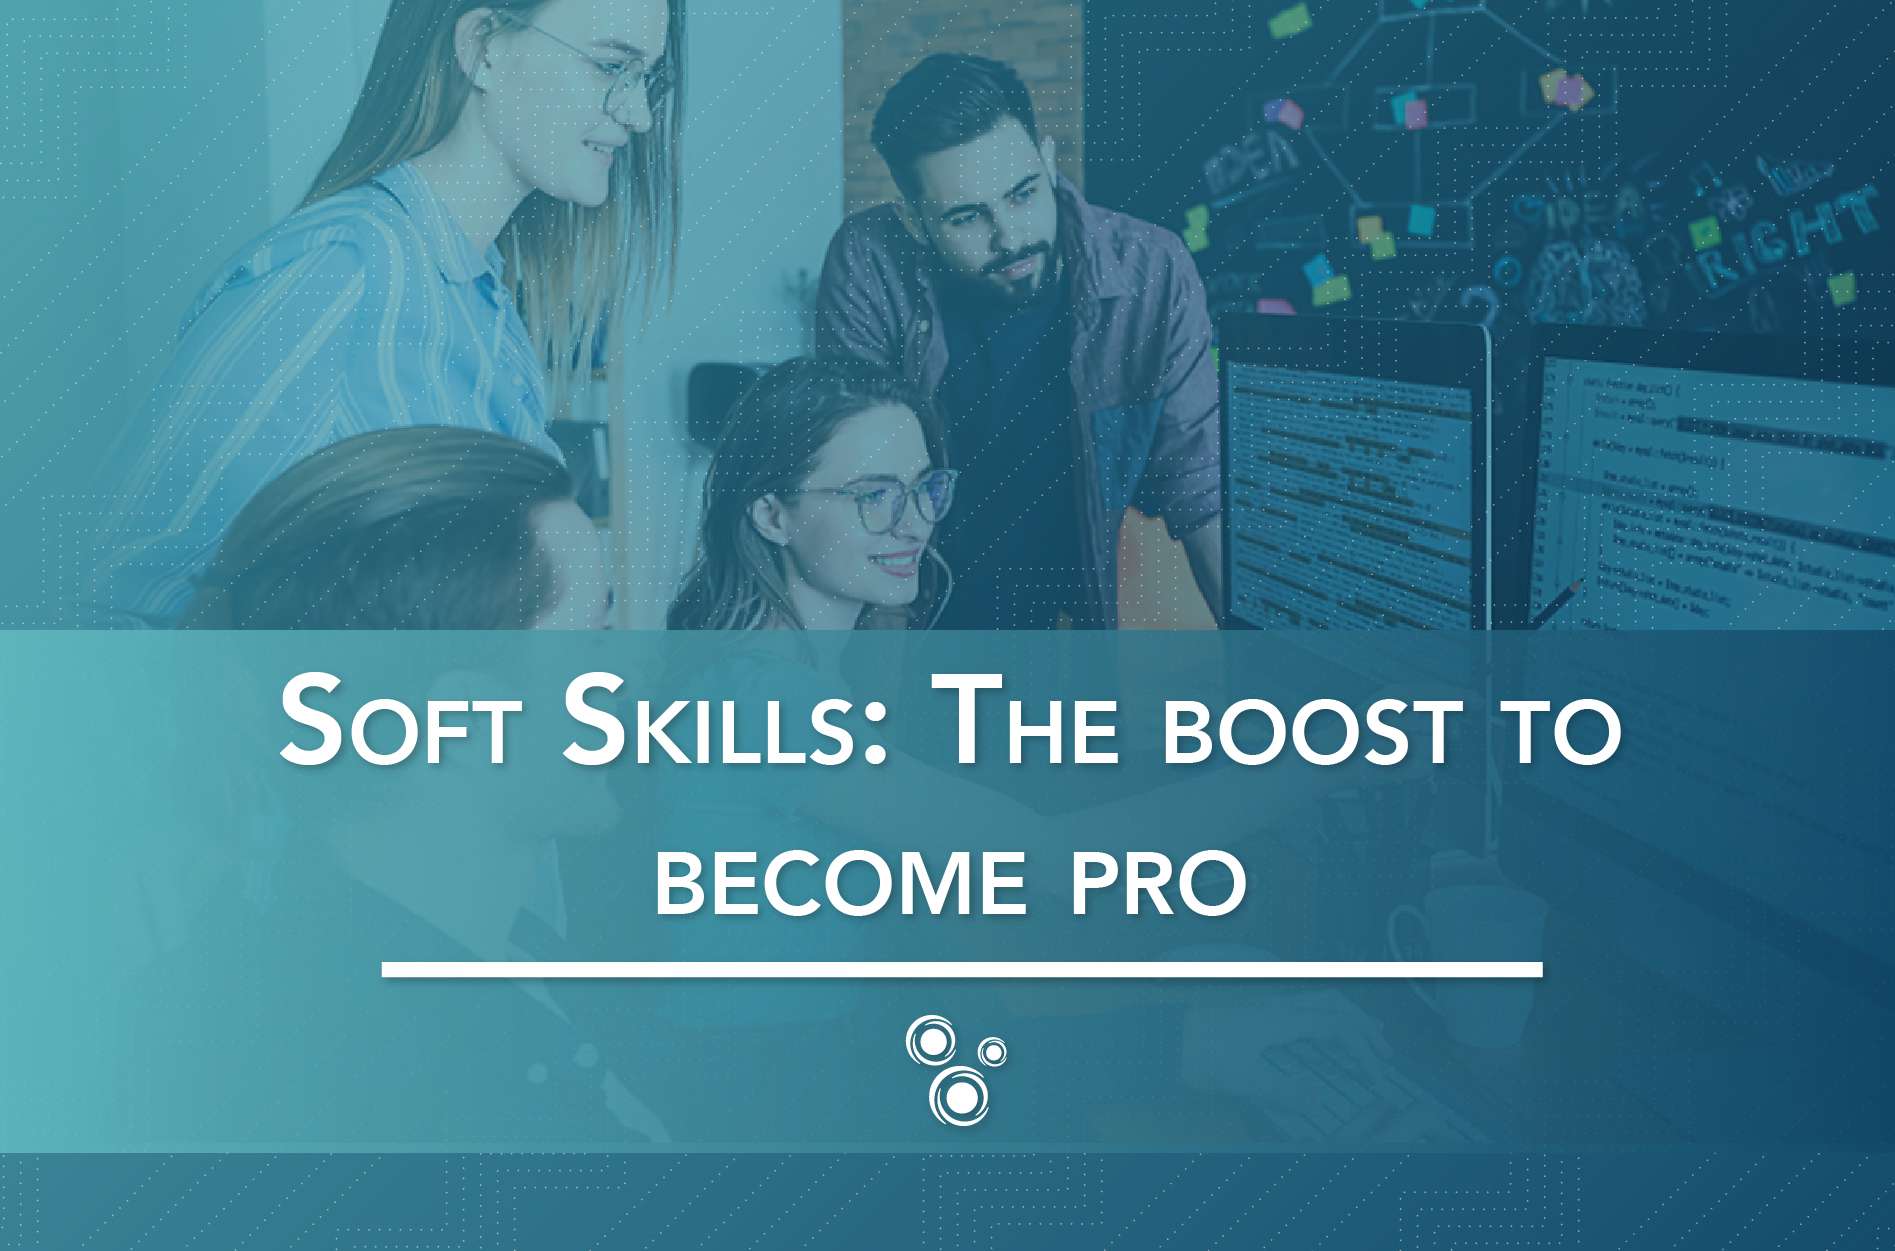 Soft Skills: The boost to become pro